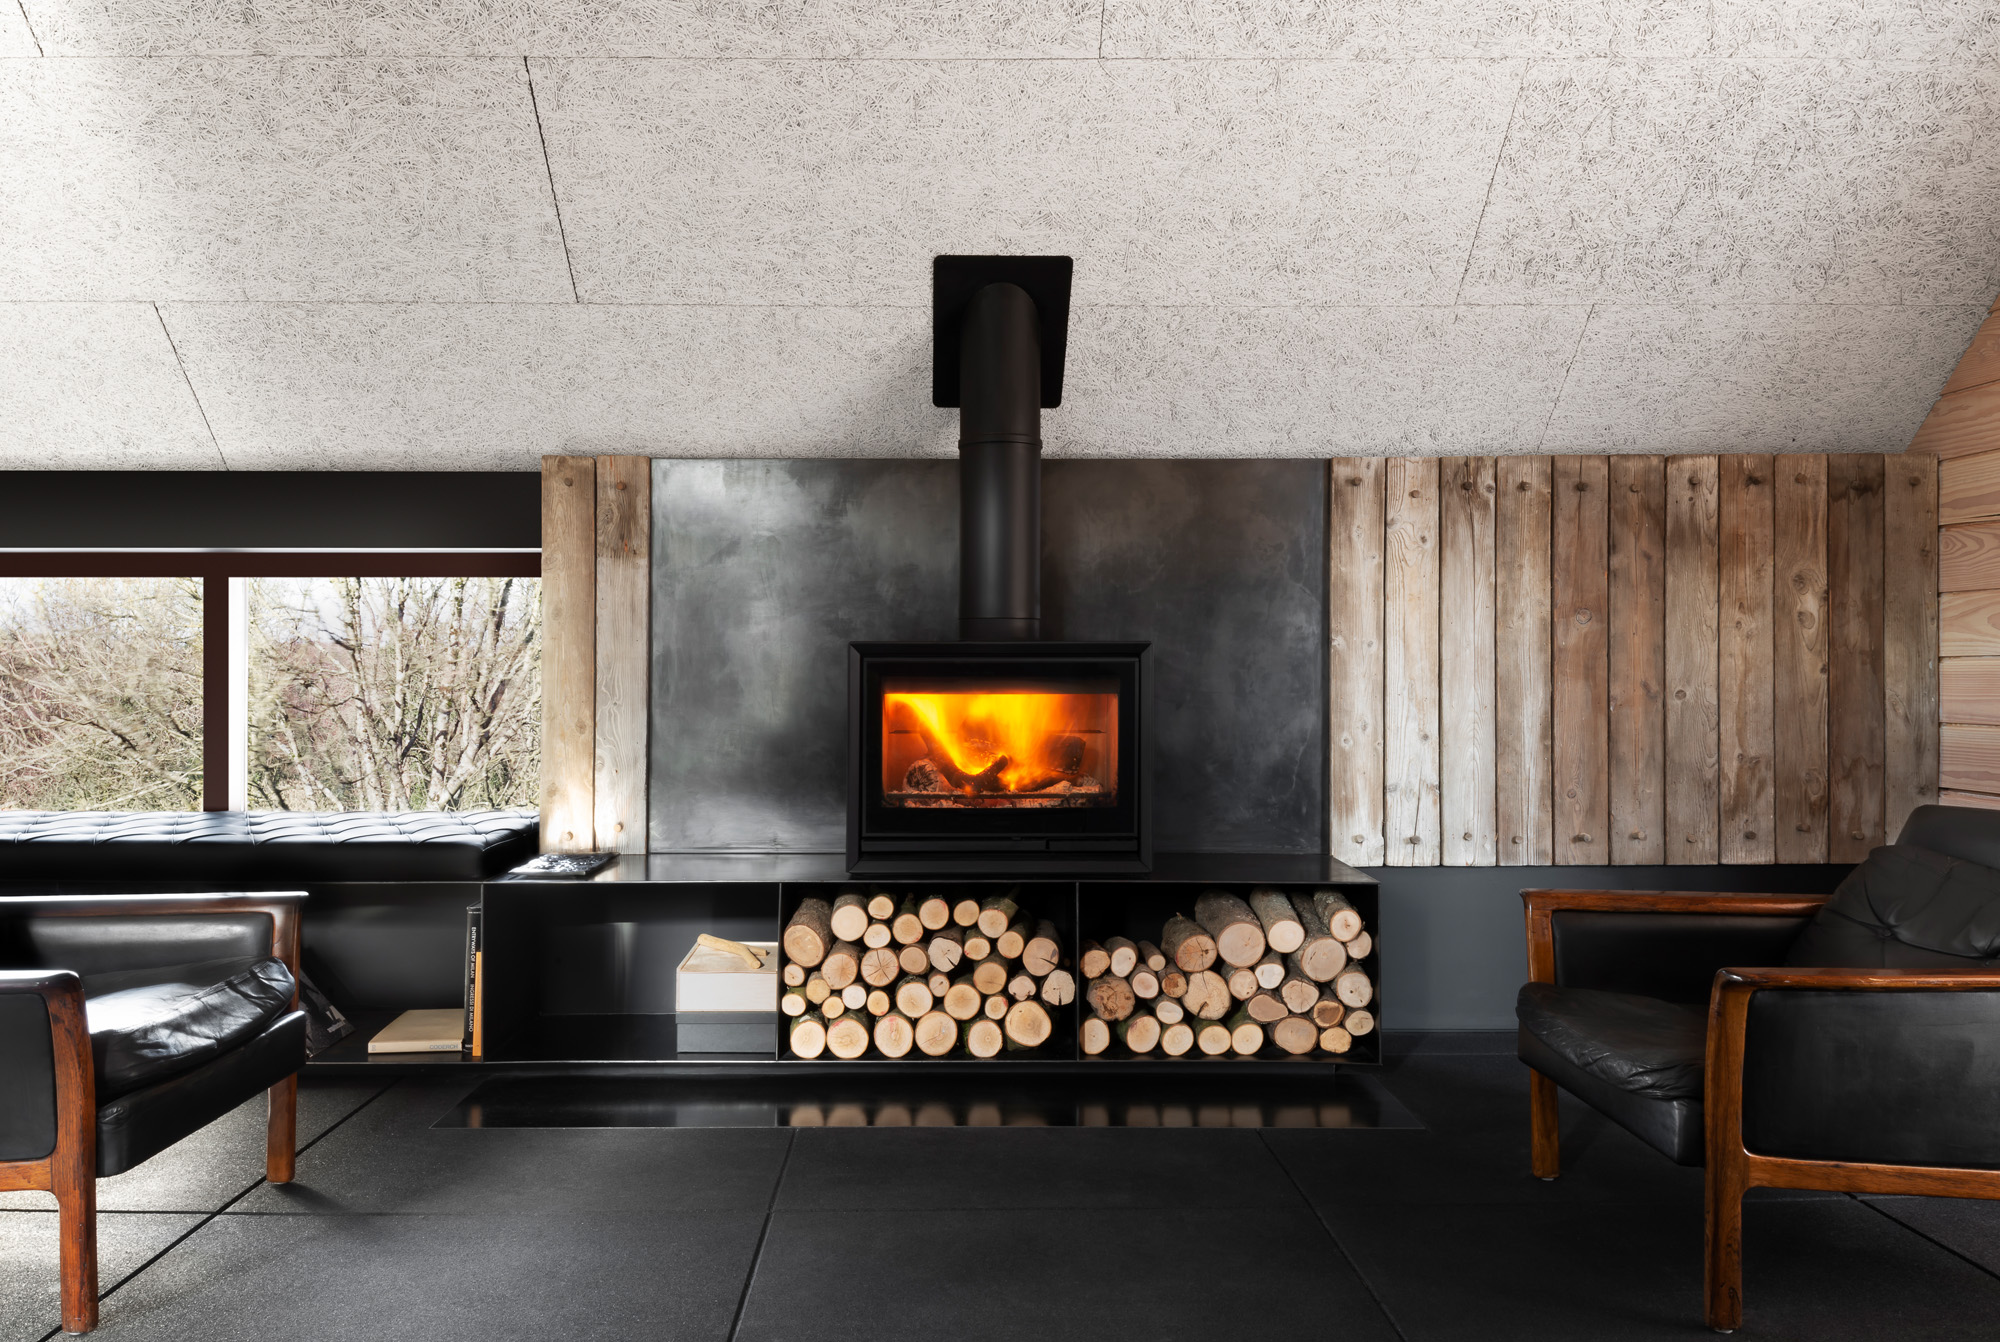 Fireplace by Richard Parr Associates - contemporary architecture design studio in London